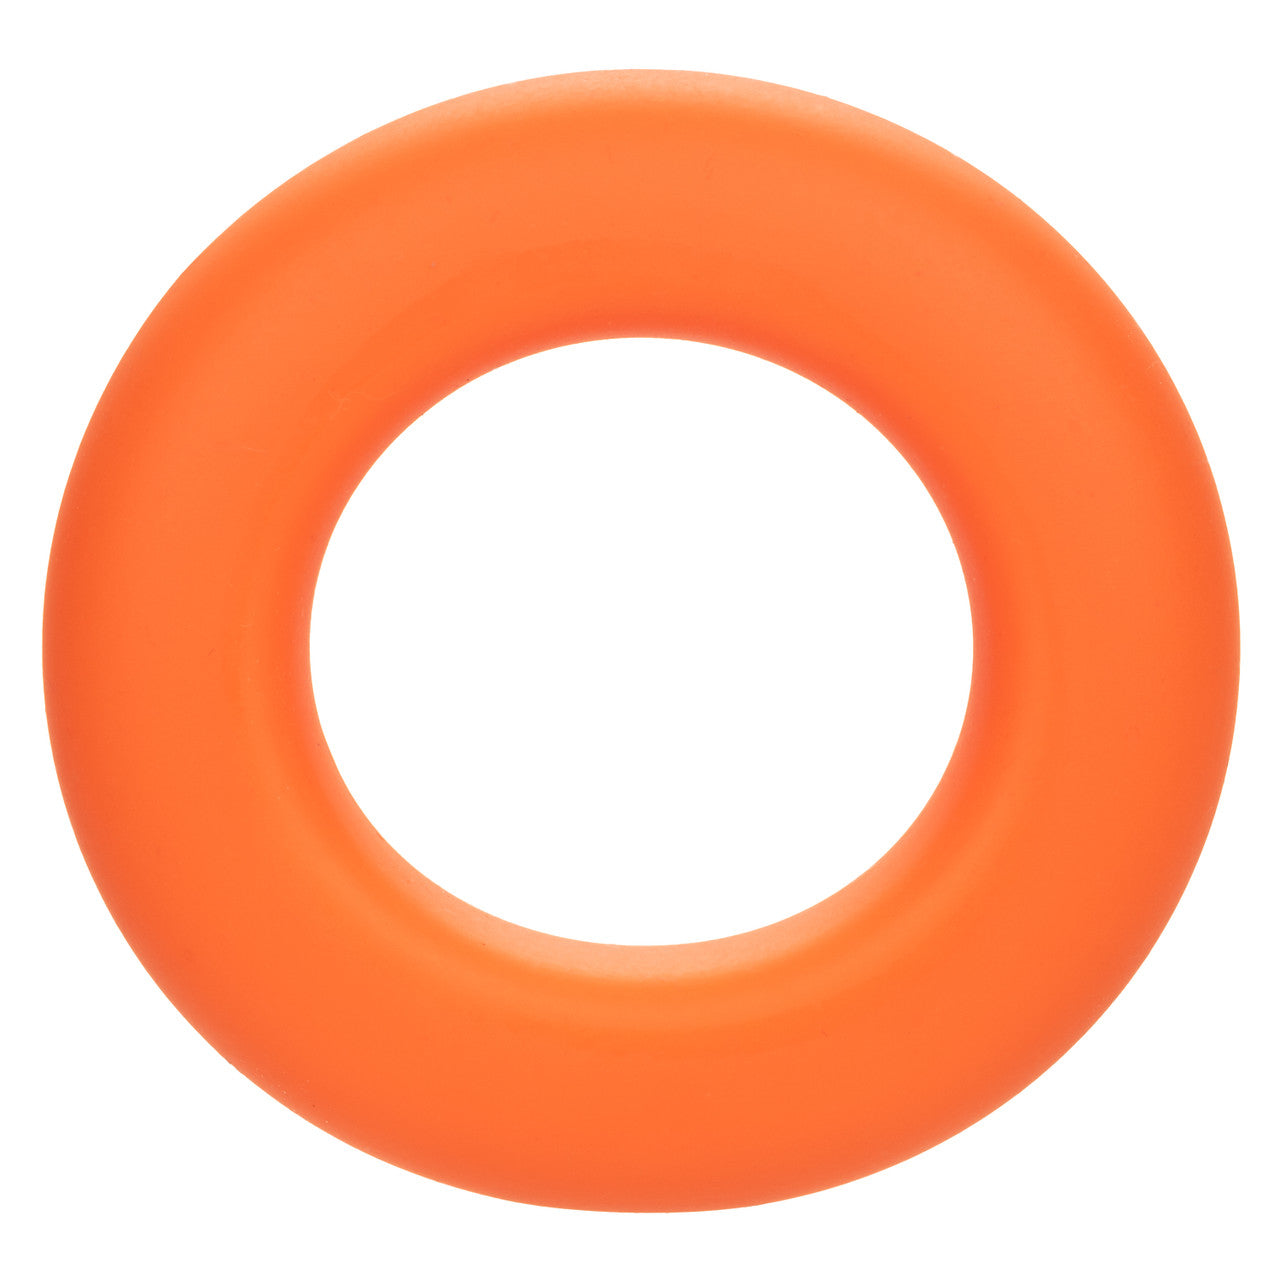 Alpha Liquid Silicone Prolong Large Ring